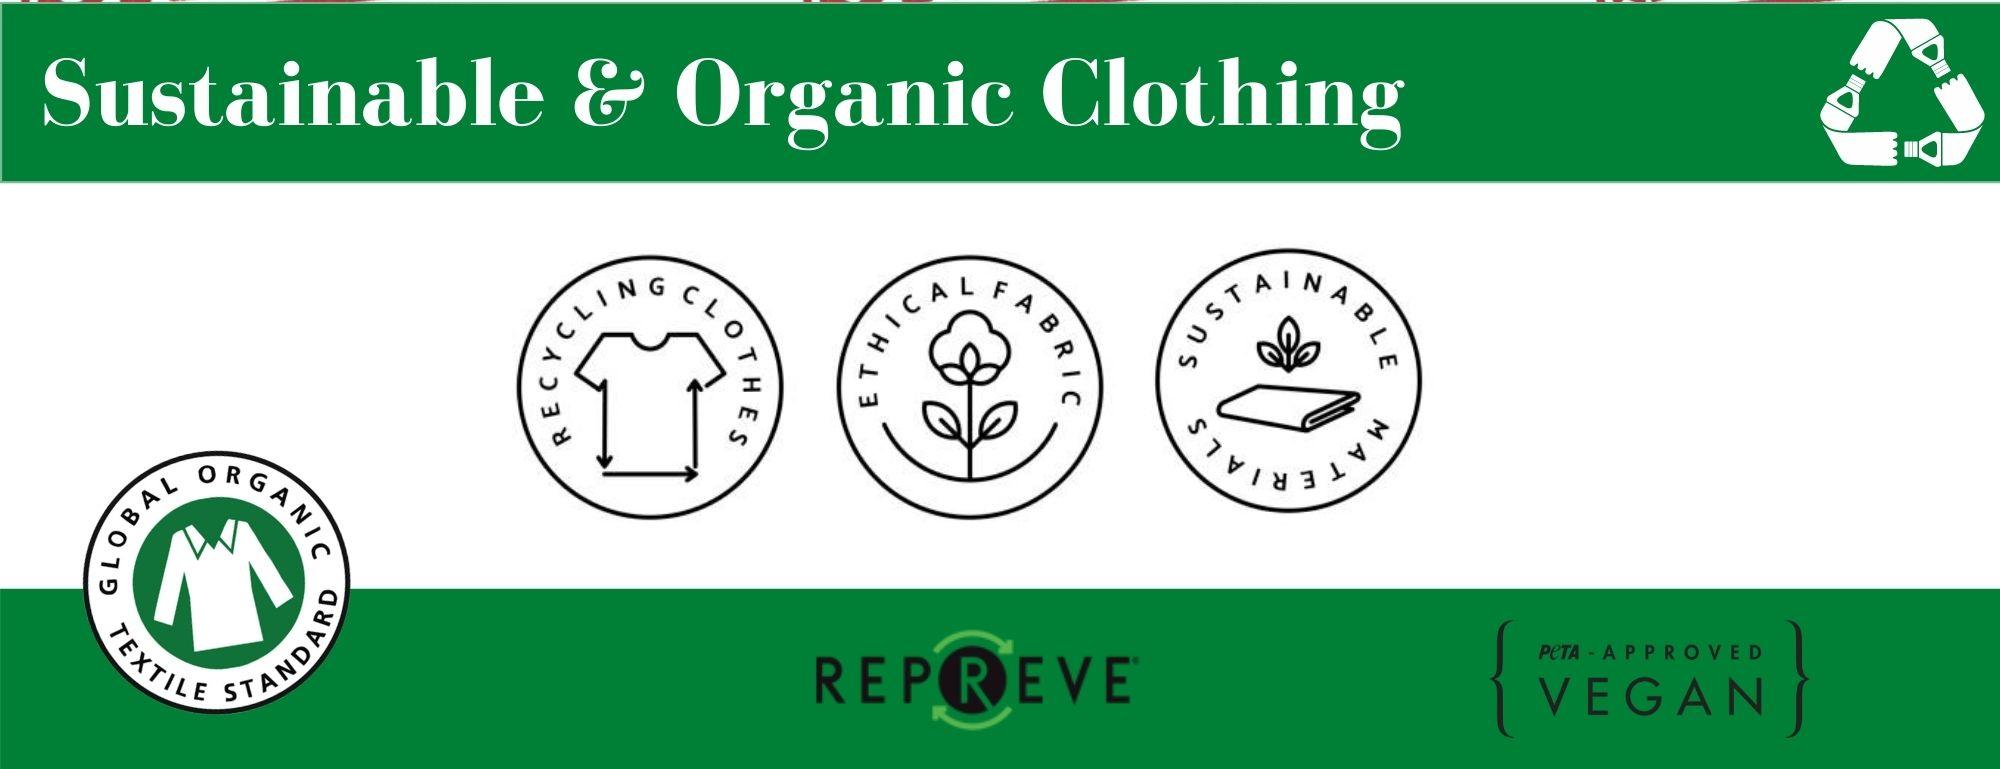 sustainable-organic-collection